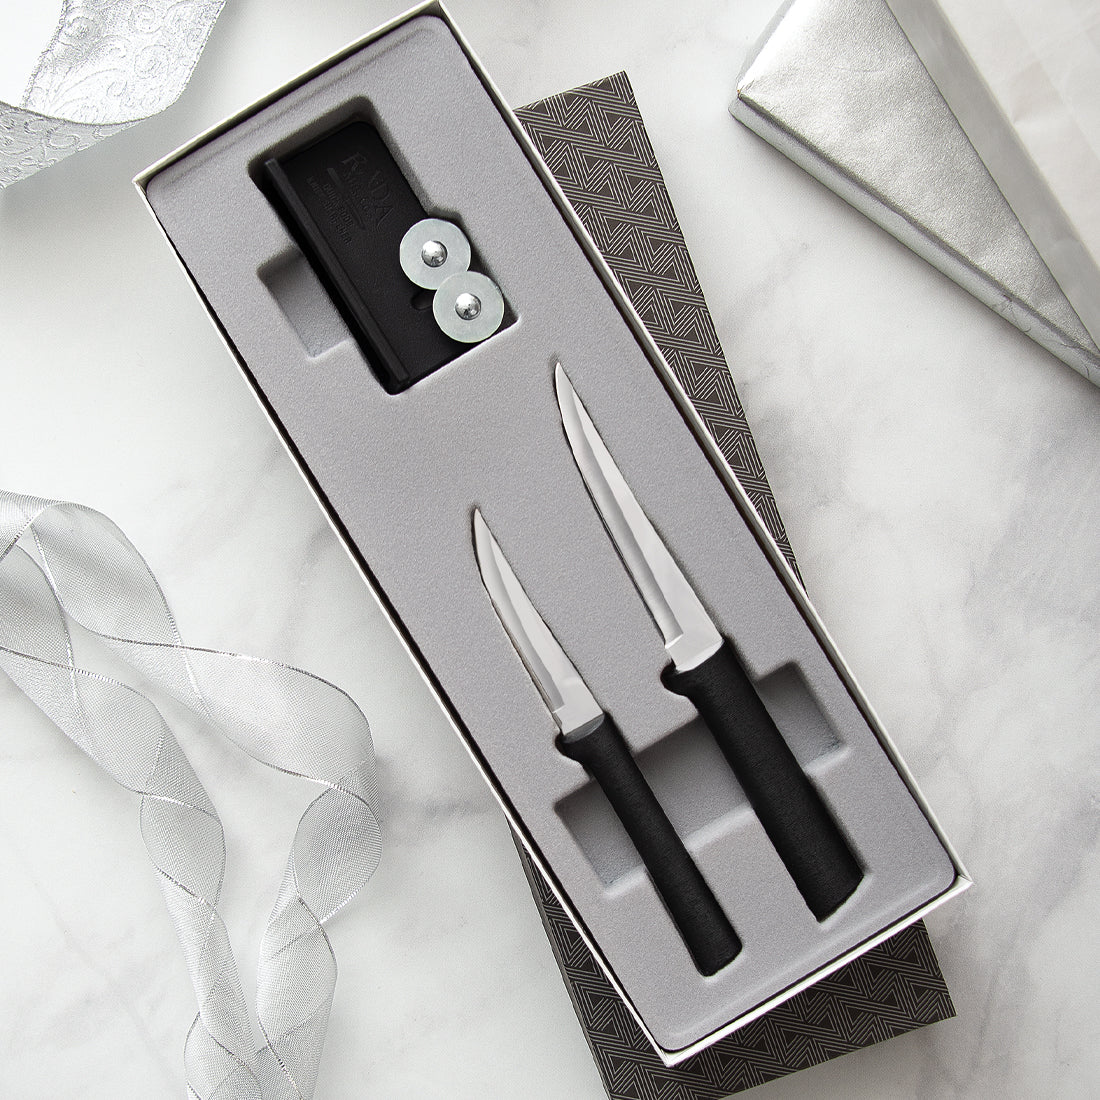  Rada Cutlery Paring Knife Set – 6 Knives with